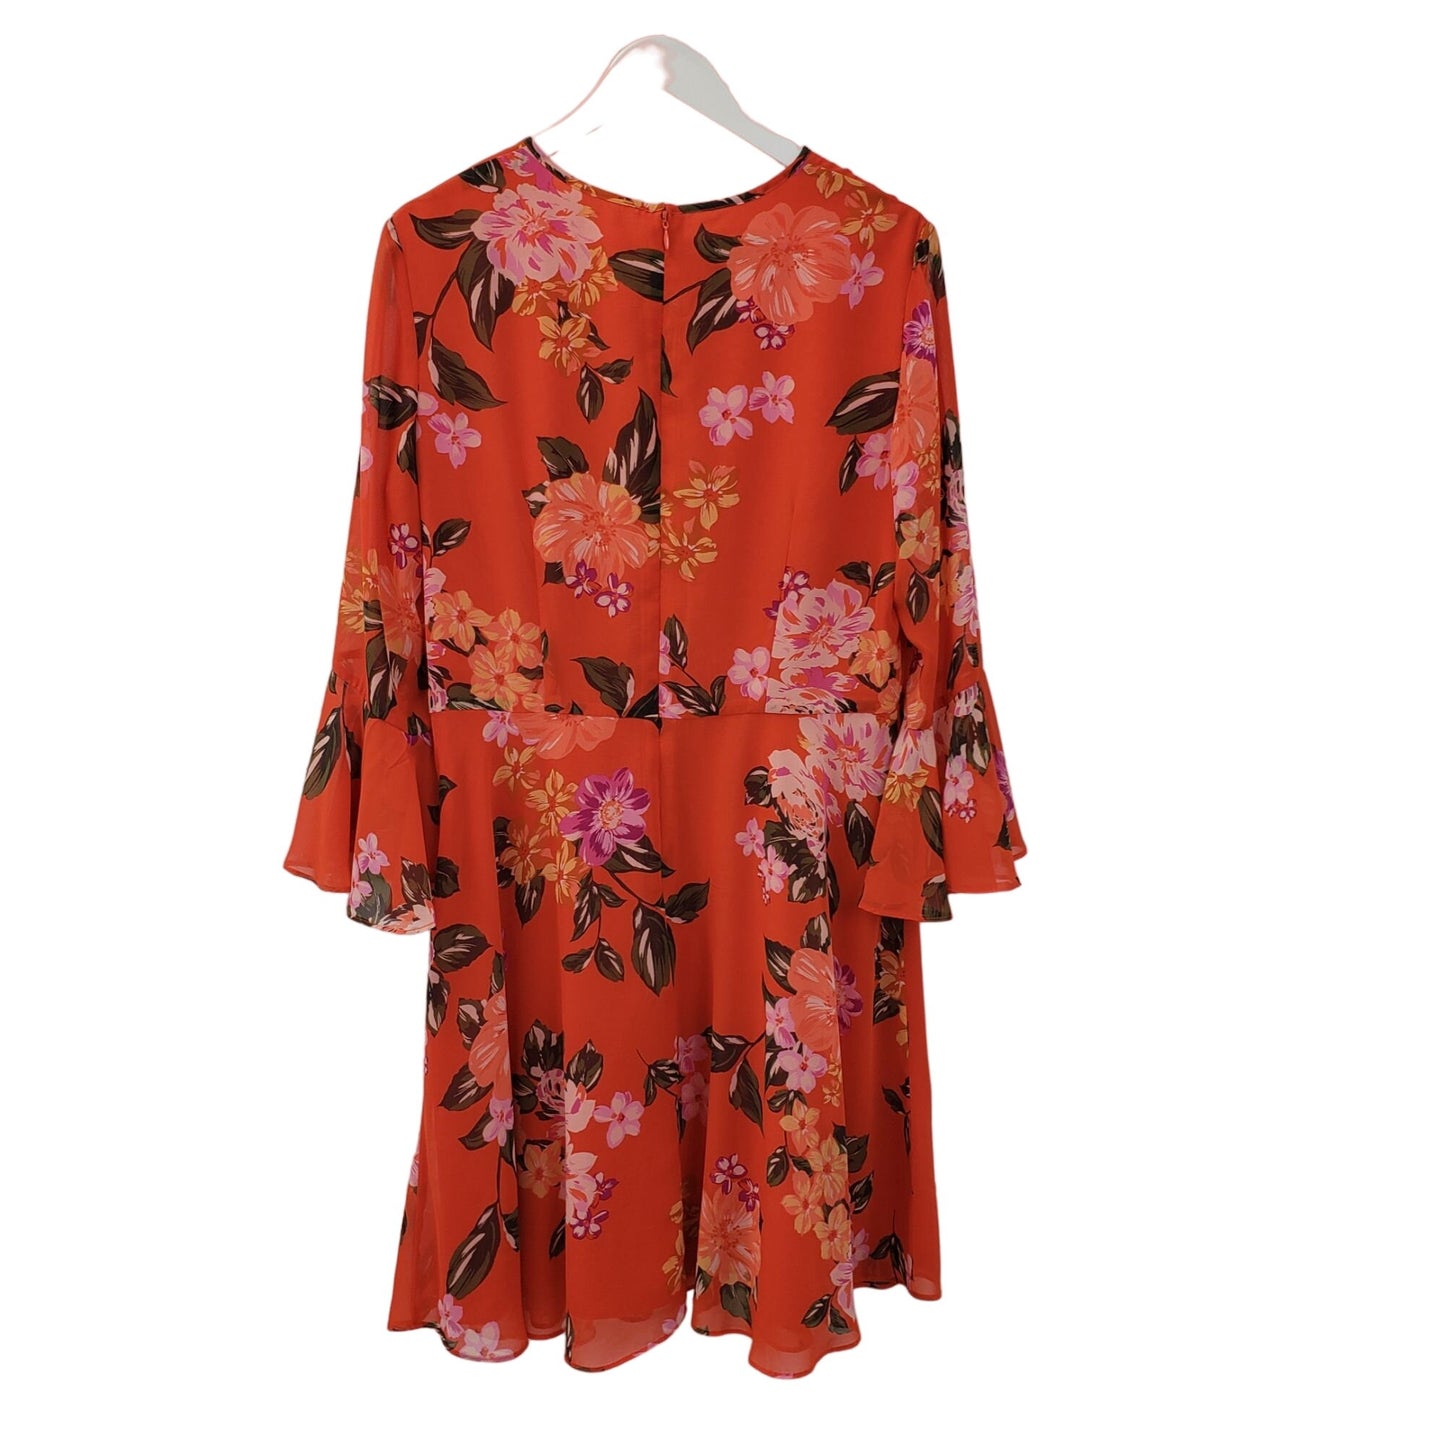 Donna Morgan Floral Bell Sleeve Dress Size 12